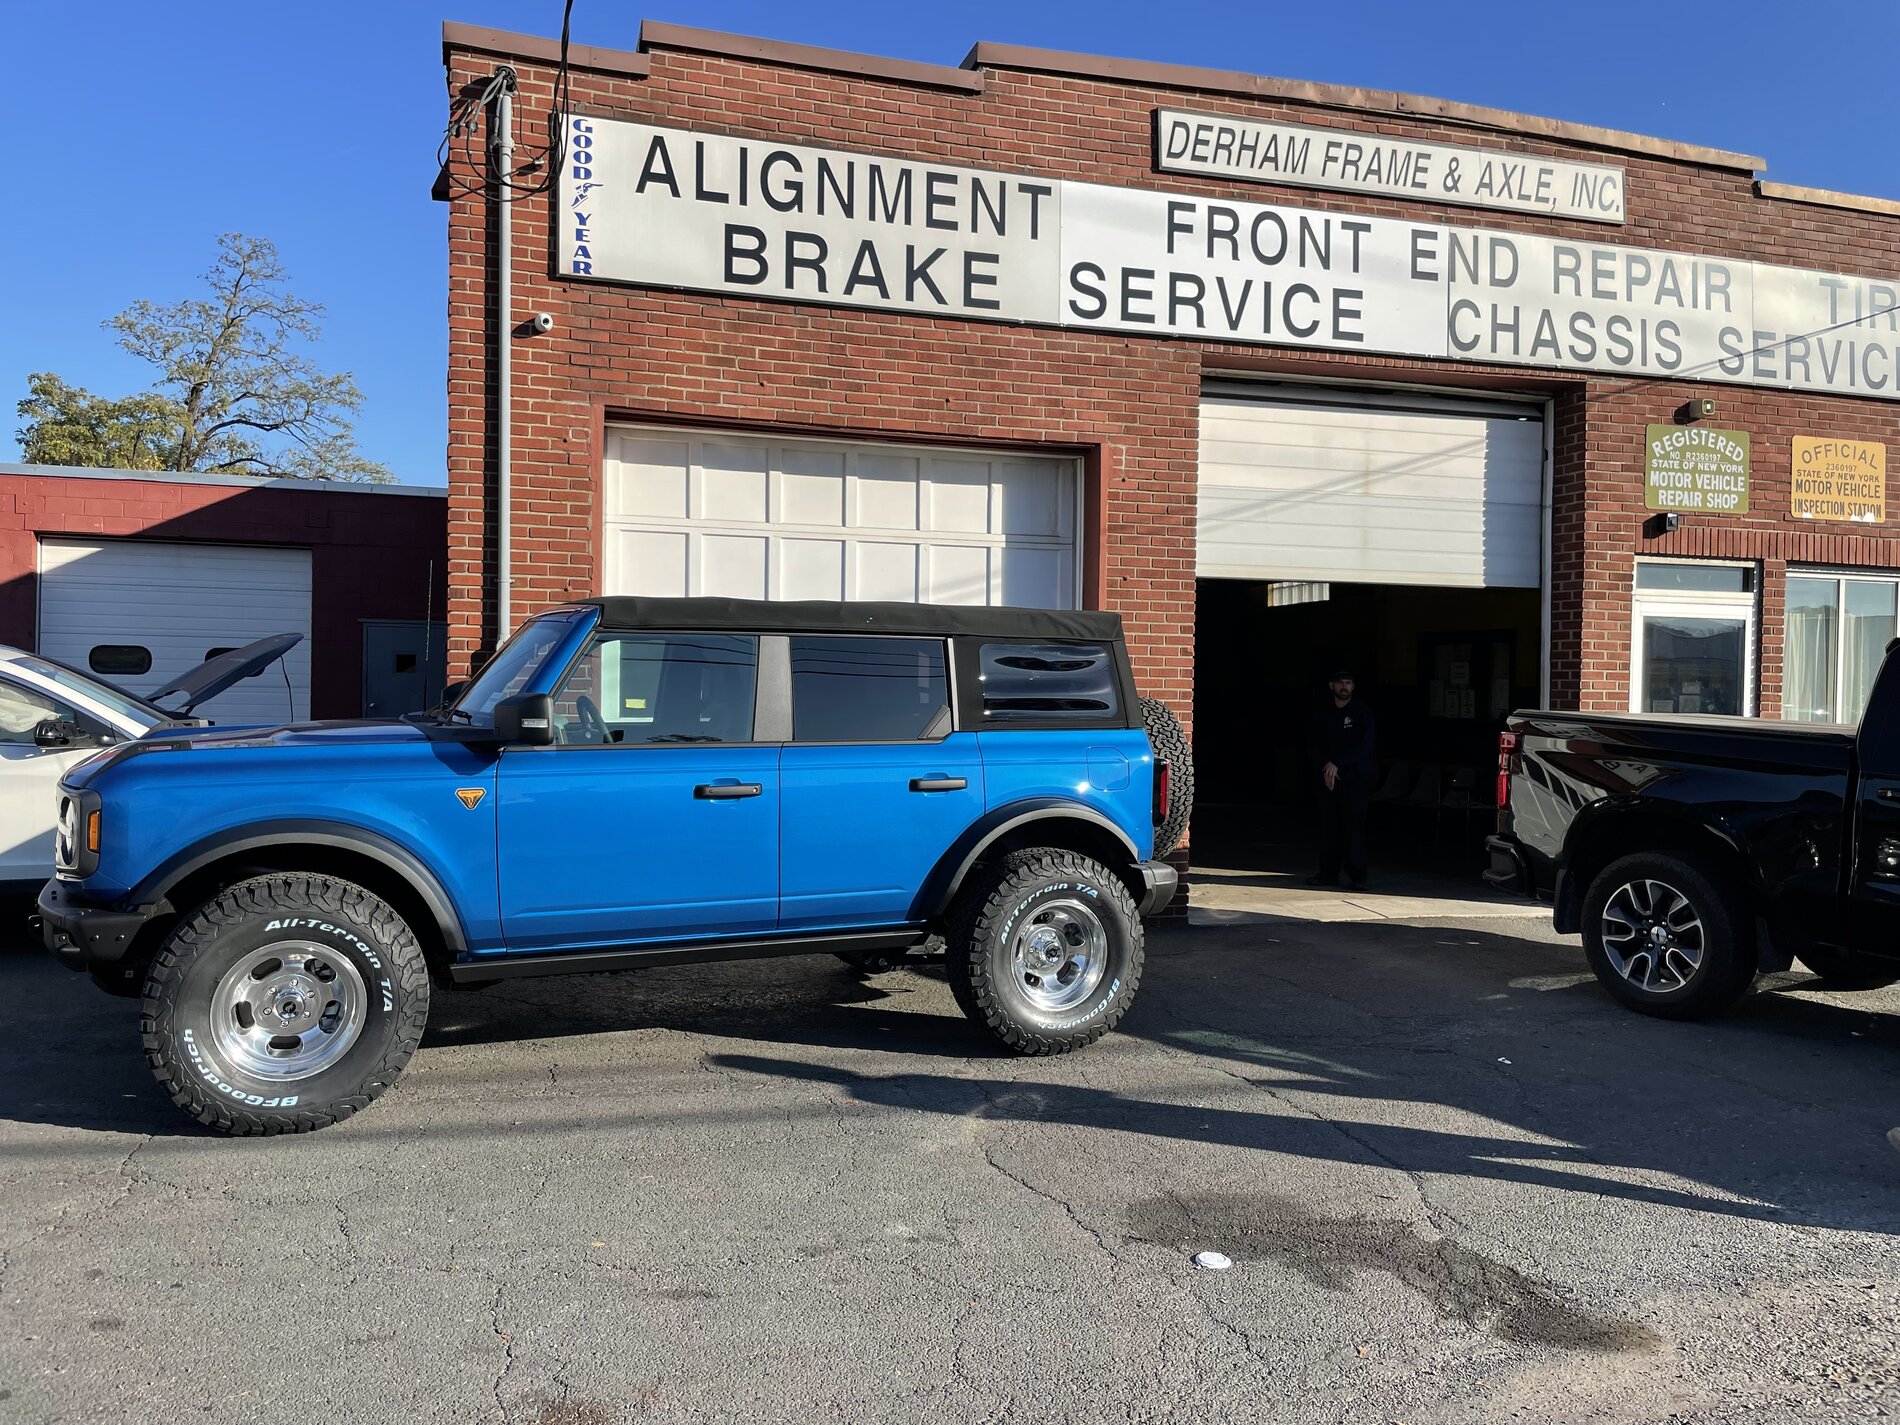 Ford Bronco Show us your installed wheel / tire upgrades here! (Pics) 6F0E1DF8-99E6-4CAB-ACF1-71541BB92473